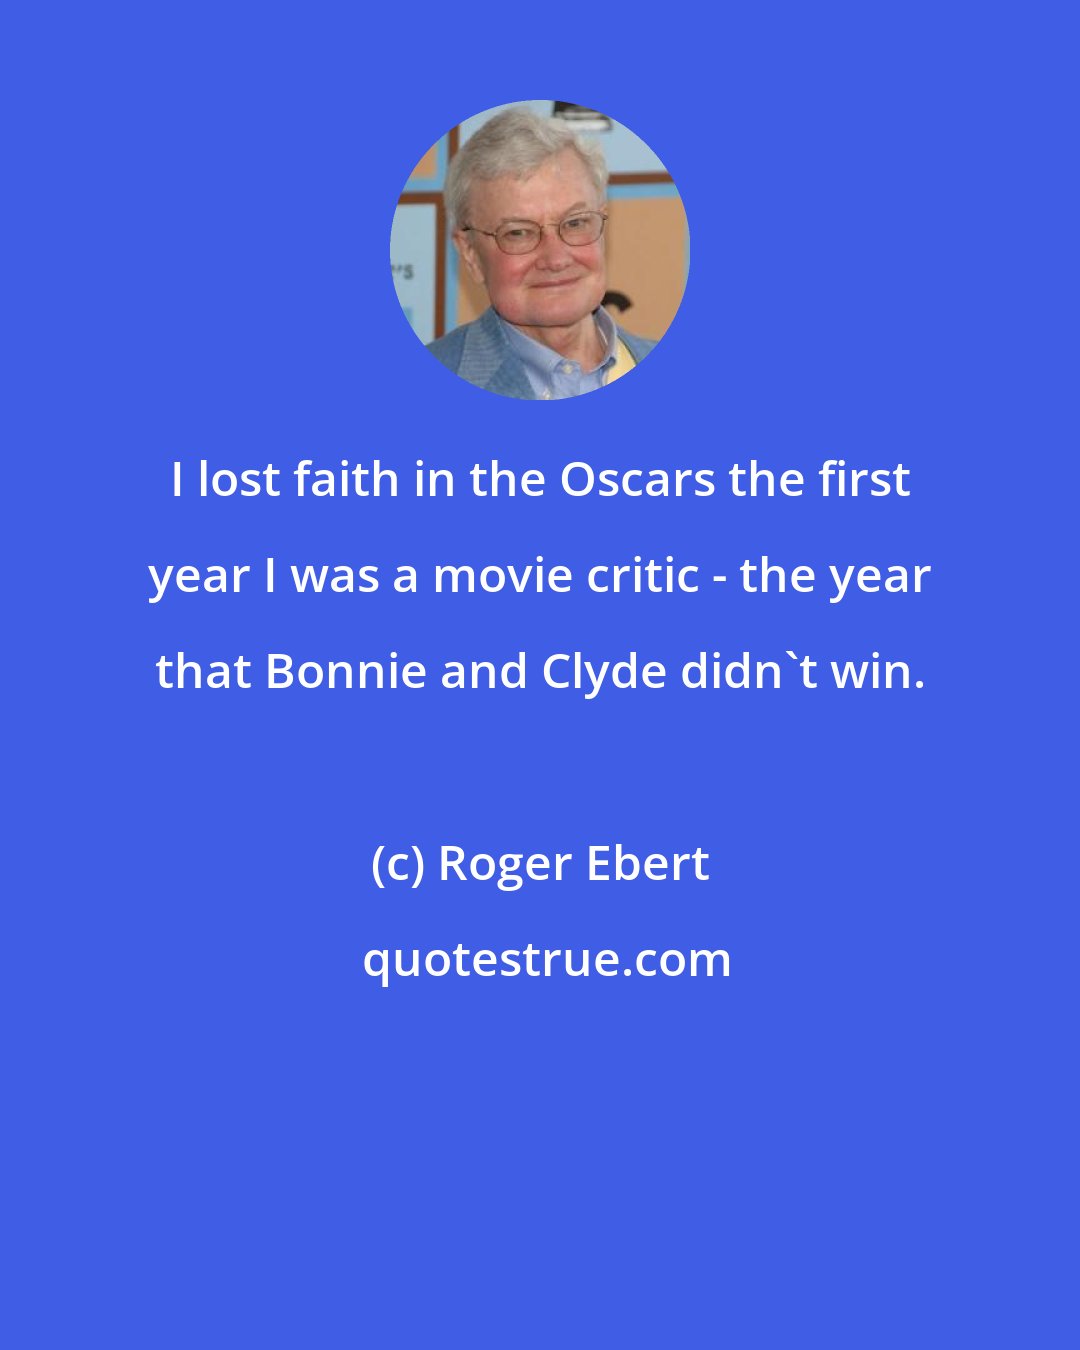 Roger Ebert: I lost faith in the Oscars the first year I was a movie critic - the year that Bonnie and Clyde didn't win.